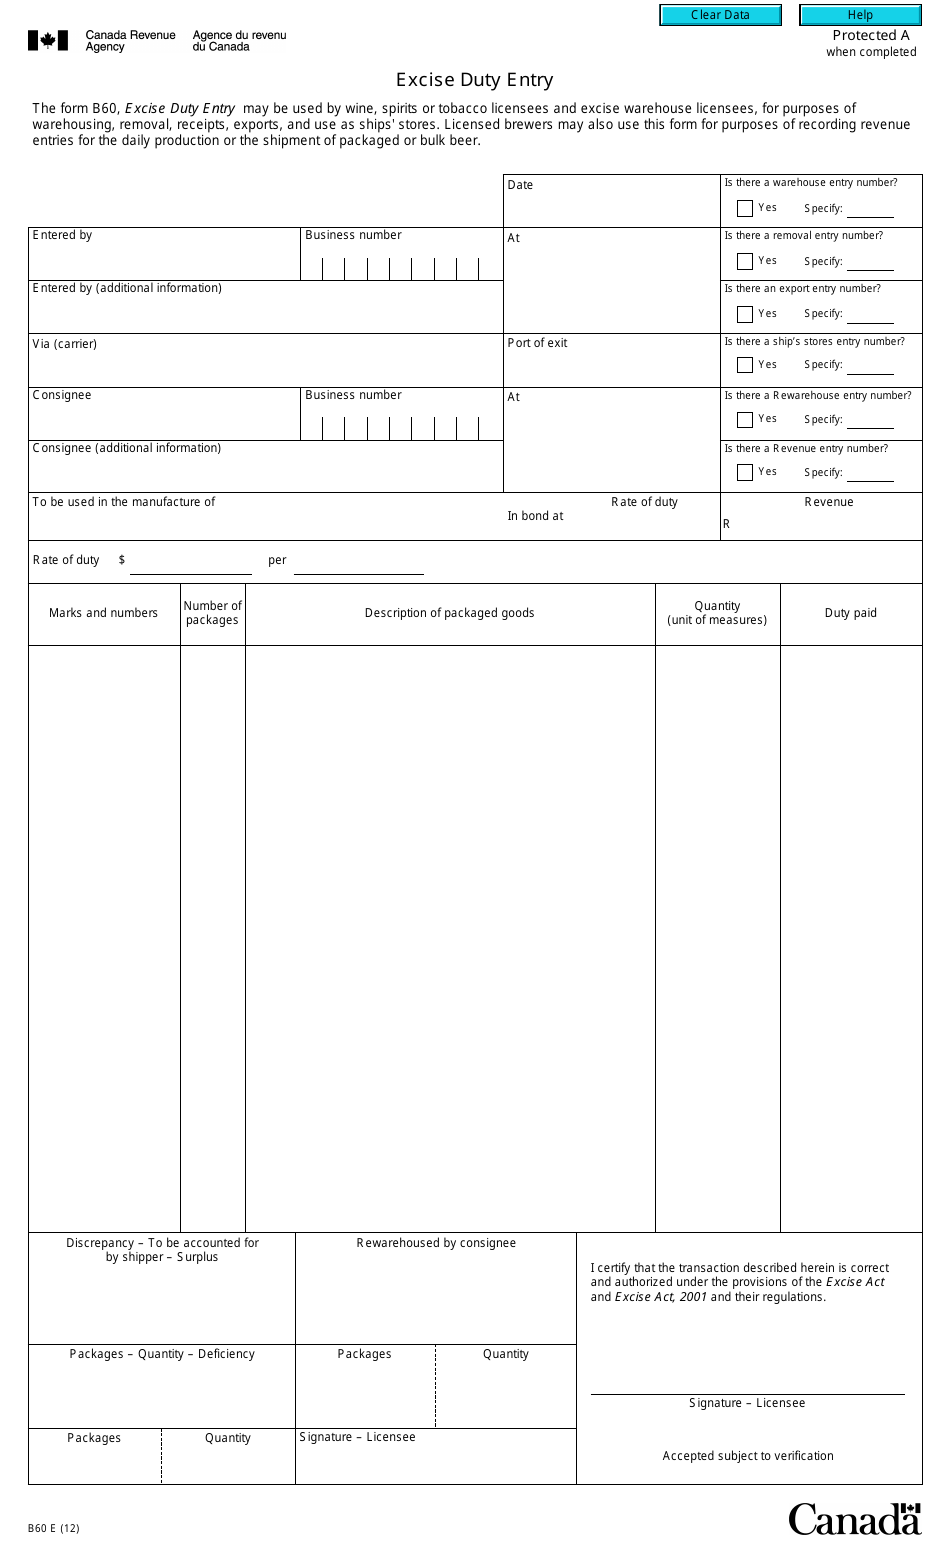 Form B60 Excise Duty Entry - Canada, Page 1